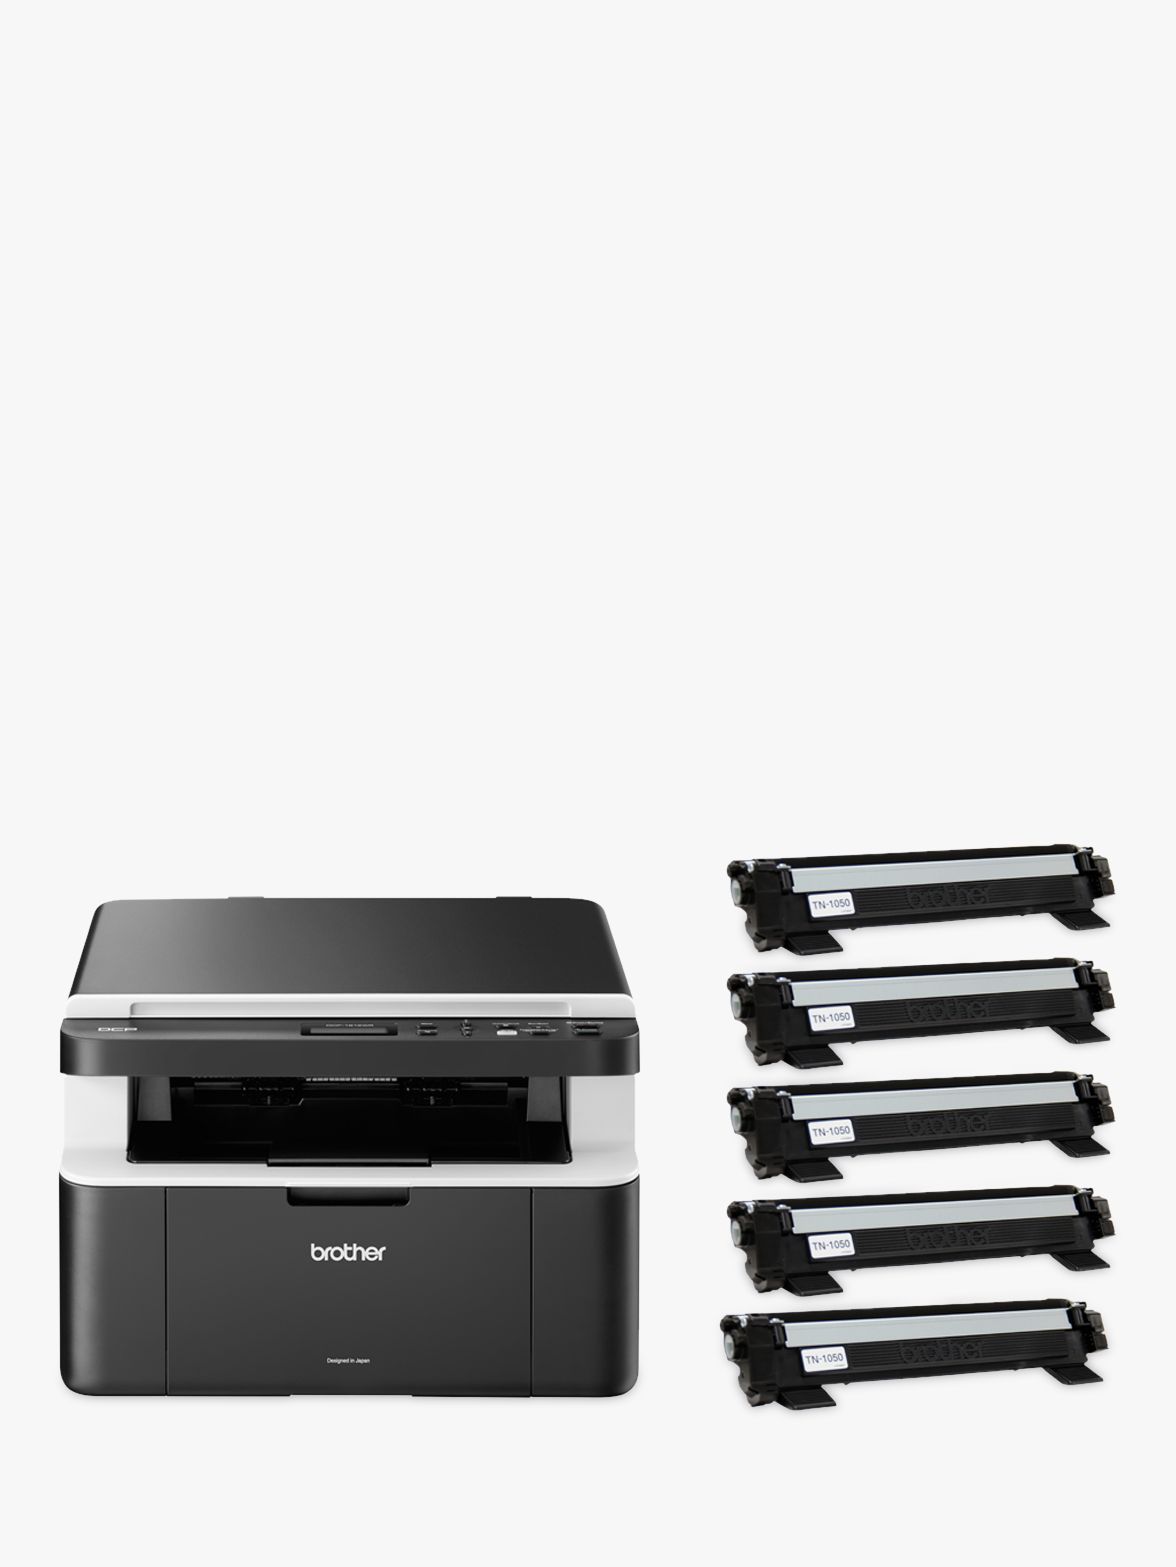 Brother DCP-1612W Wireless All-In-One Mono Laser Printer with 5 Toners, Black